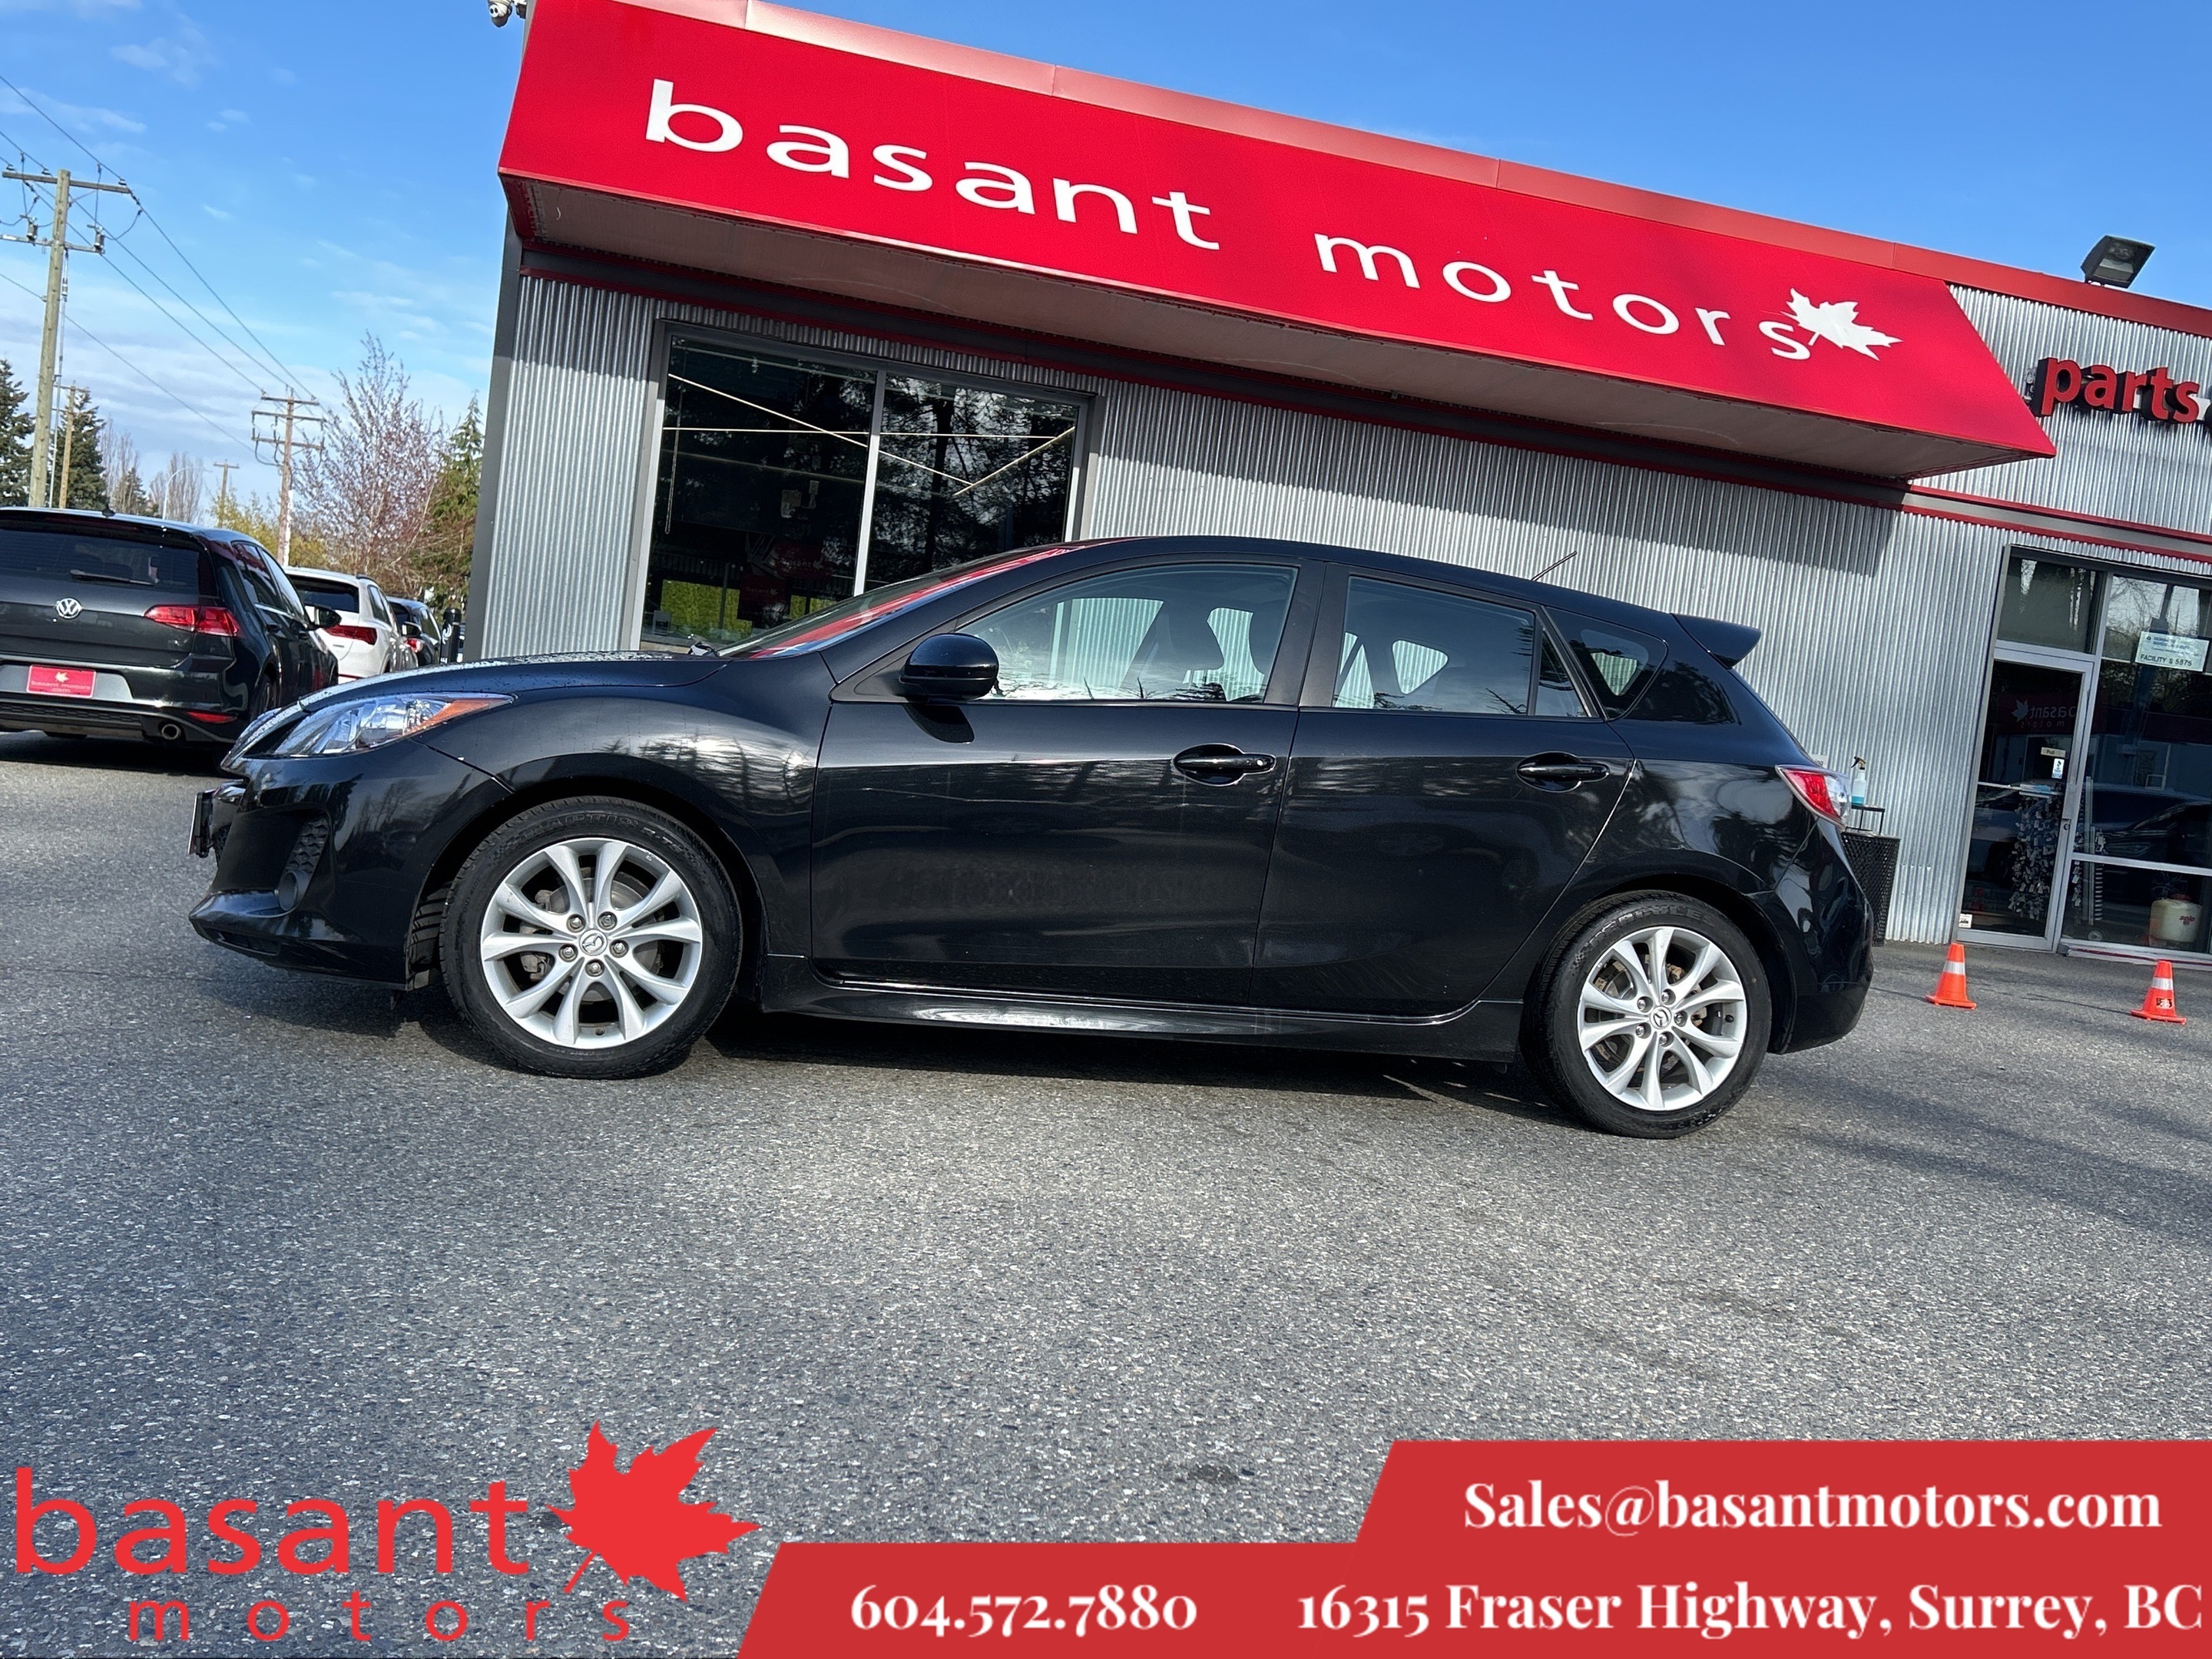 2013 Mazda Mazda3 Manual!! Low KMs, Sunroof, Alloy Wheels, Leather!